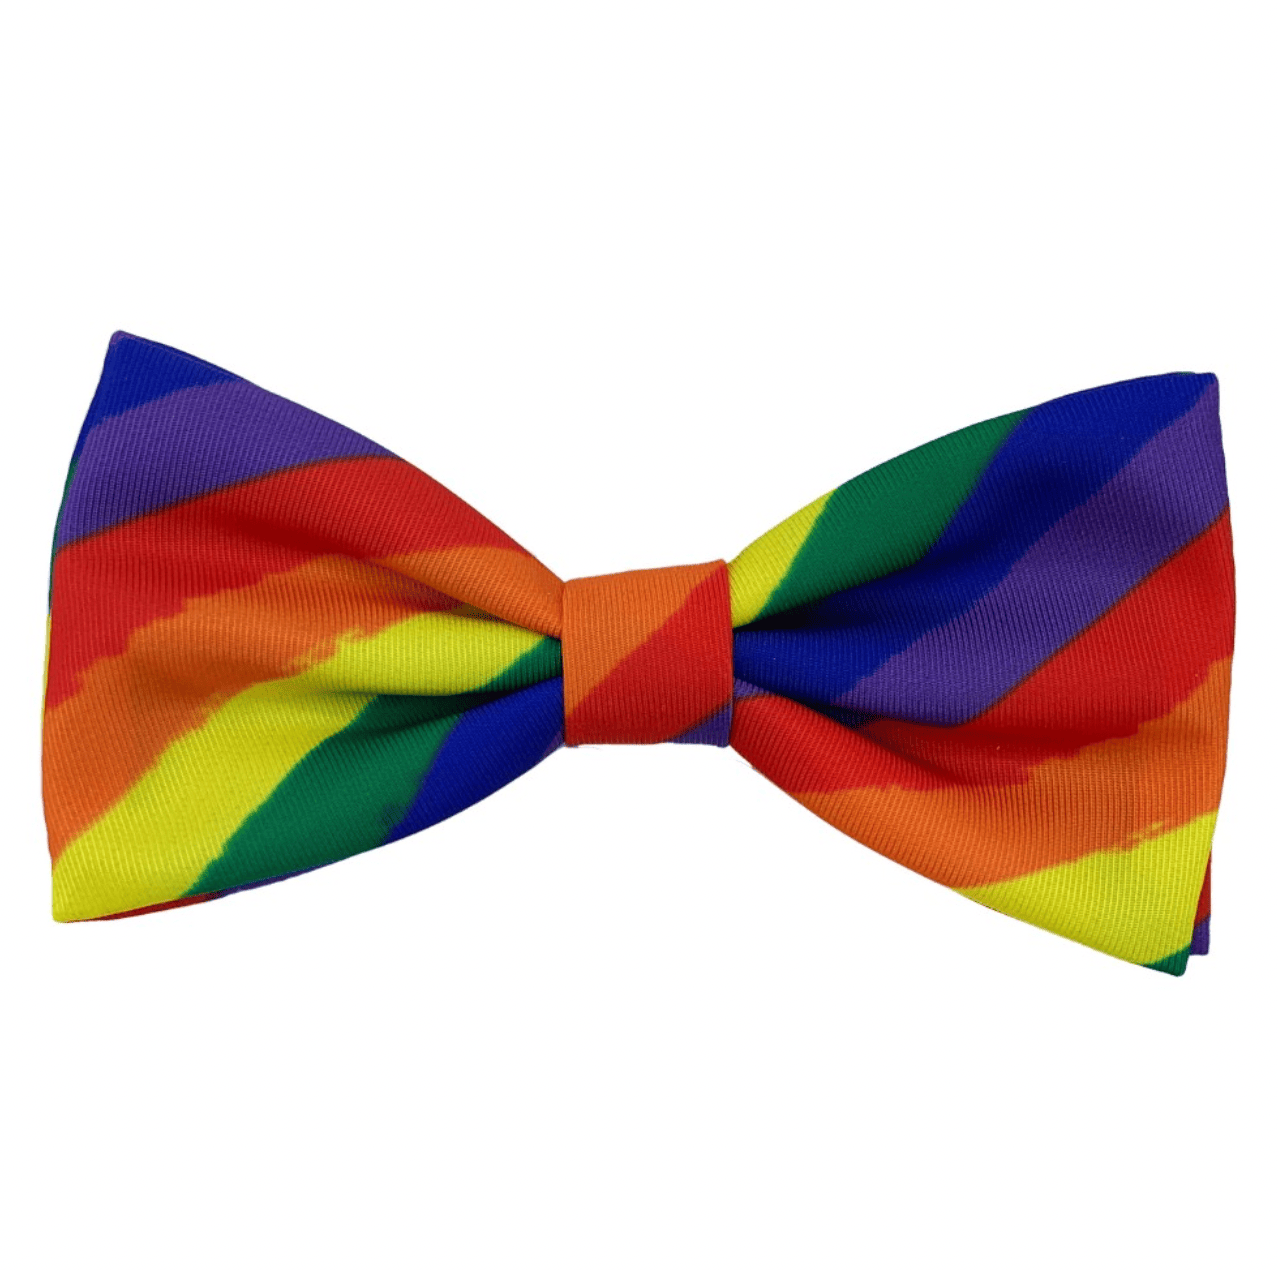 Equality Bow Tie.